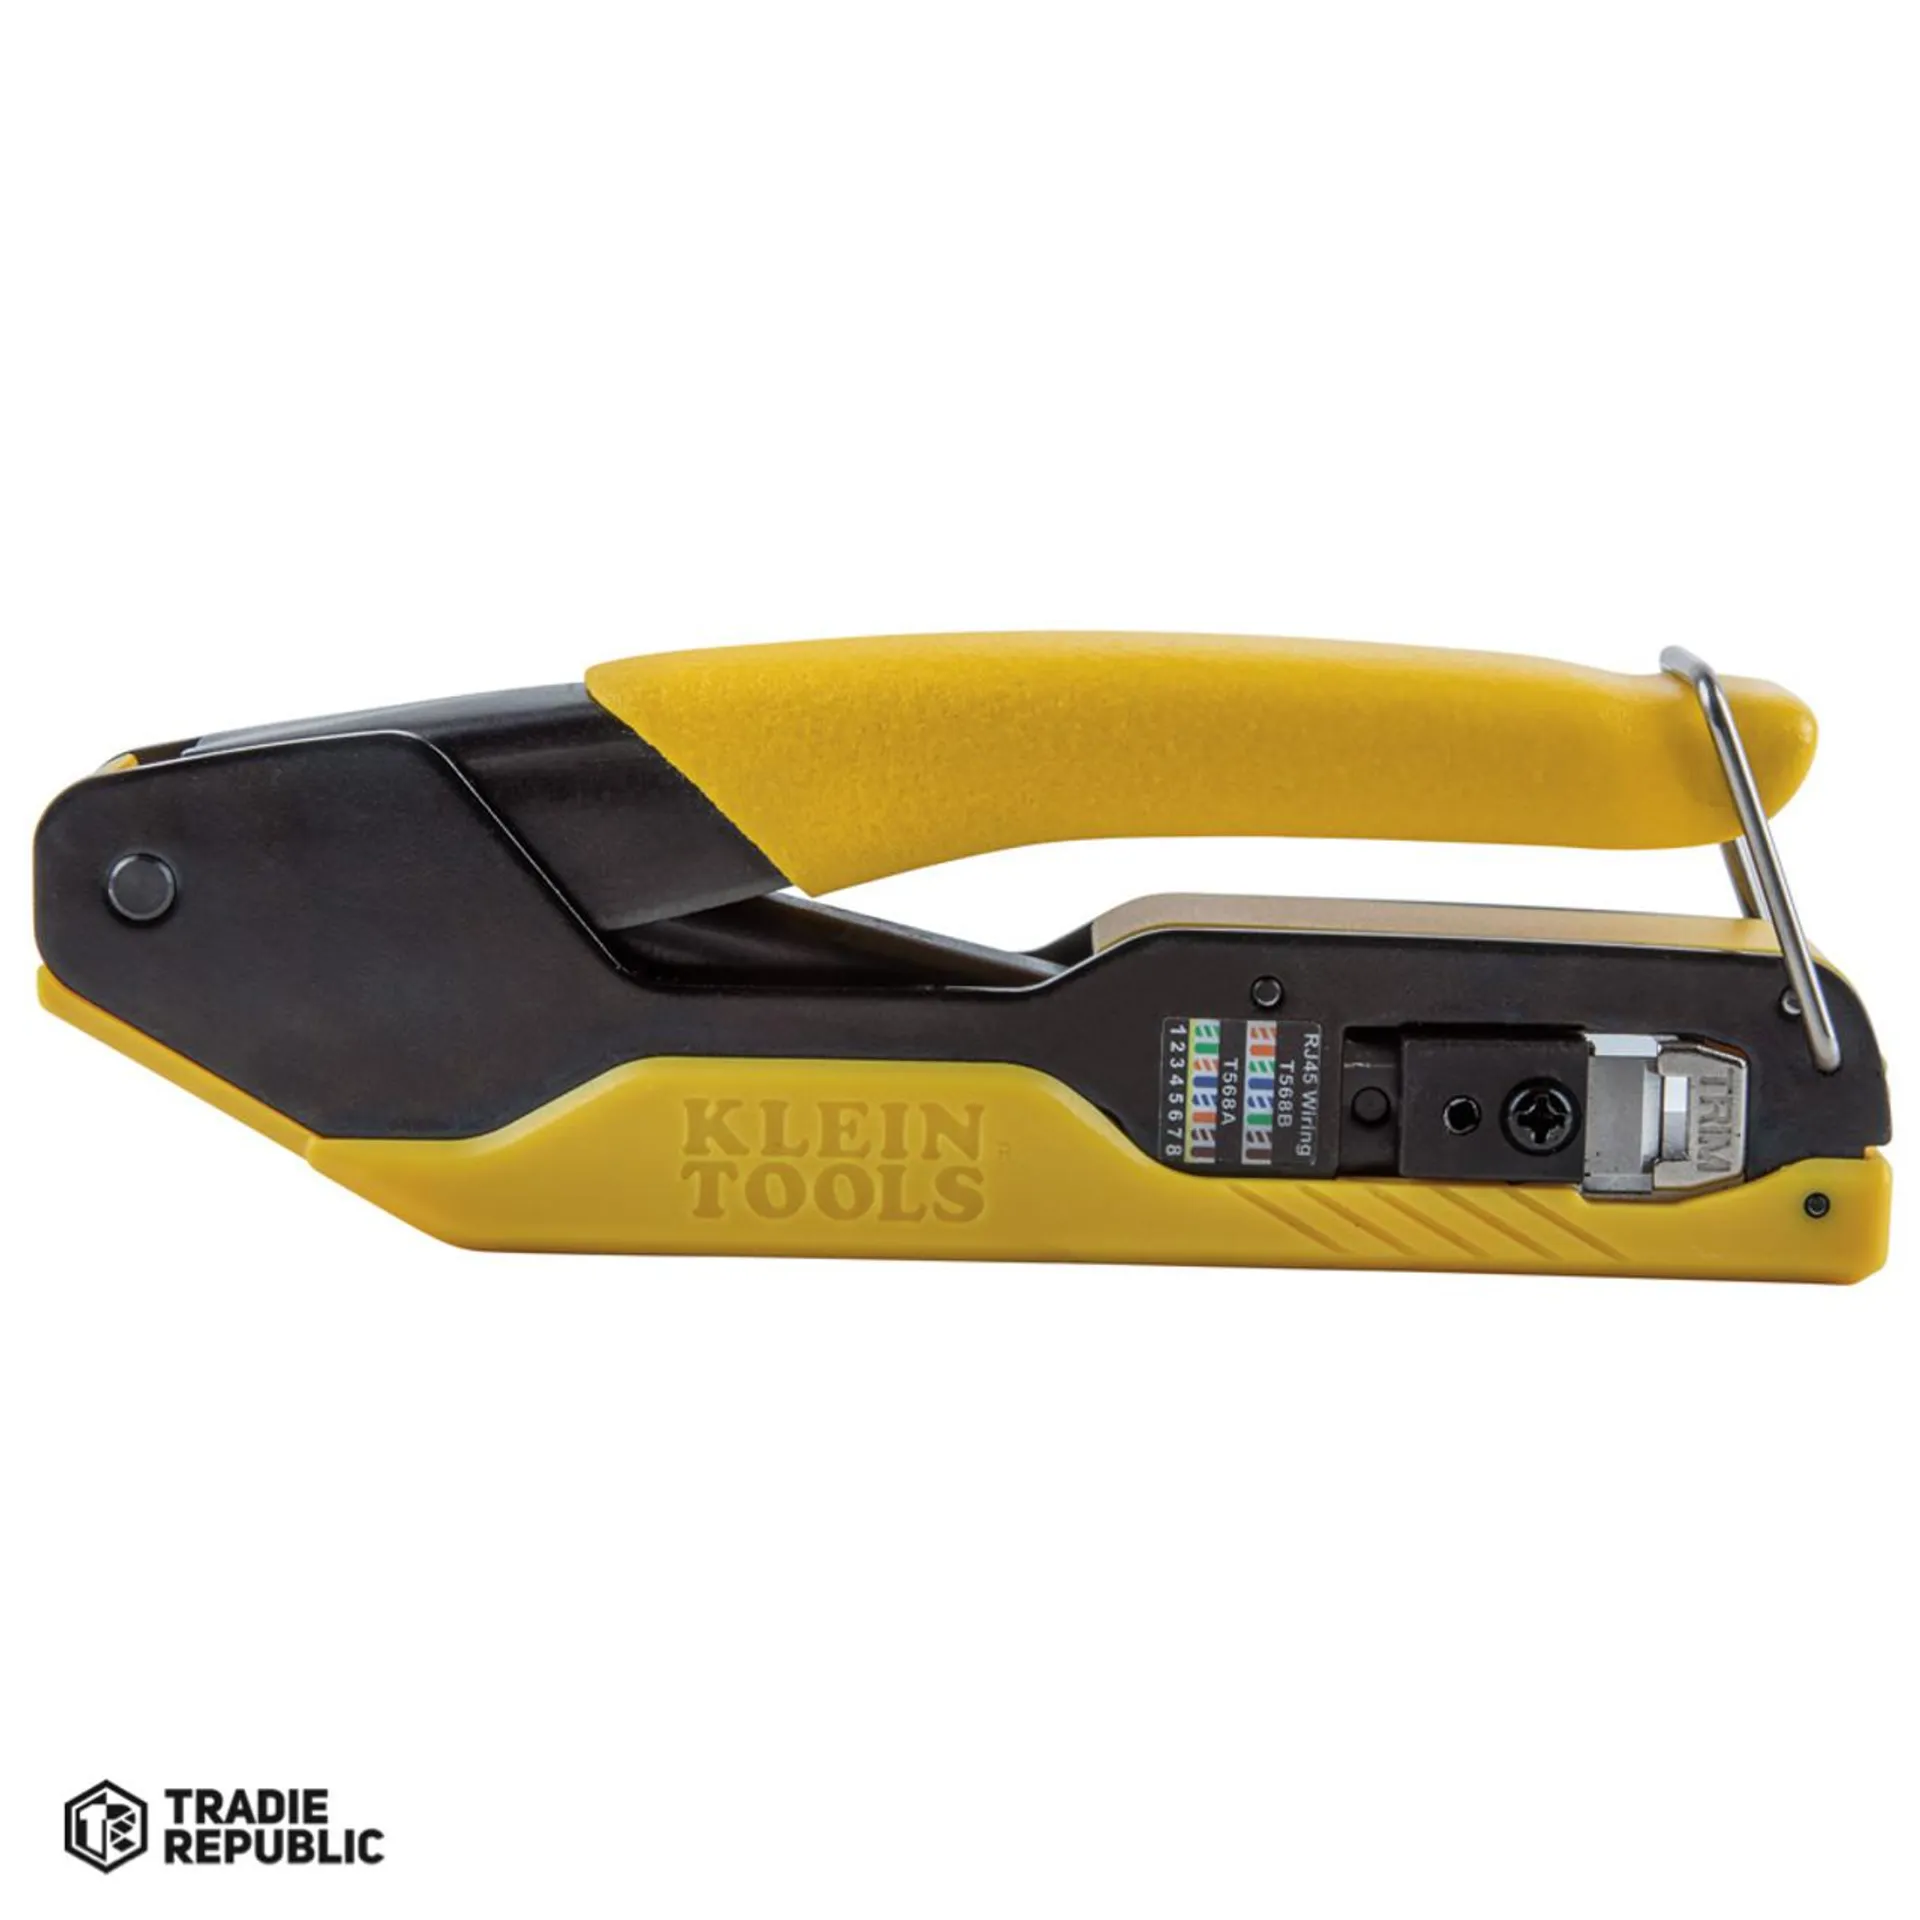 Klein Data Cable Crimping Tool for Pass-Thru, Compact